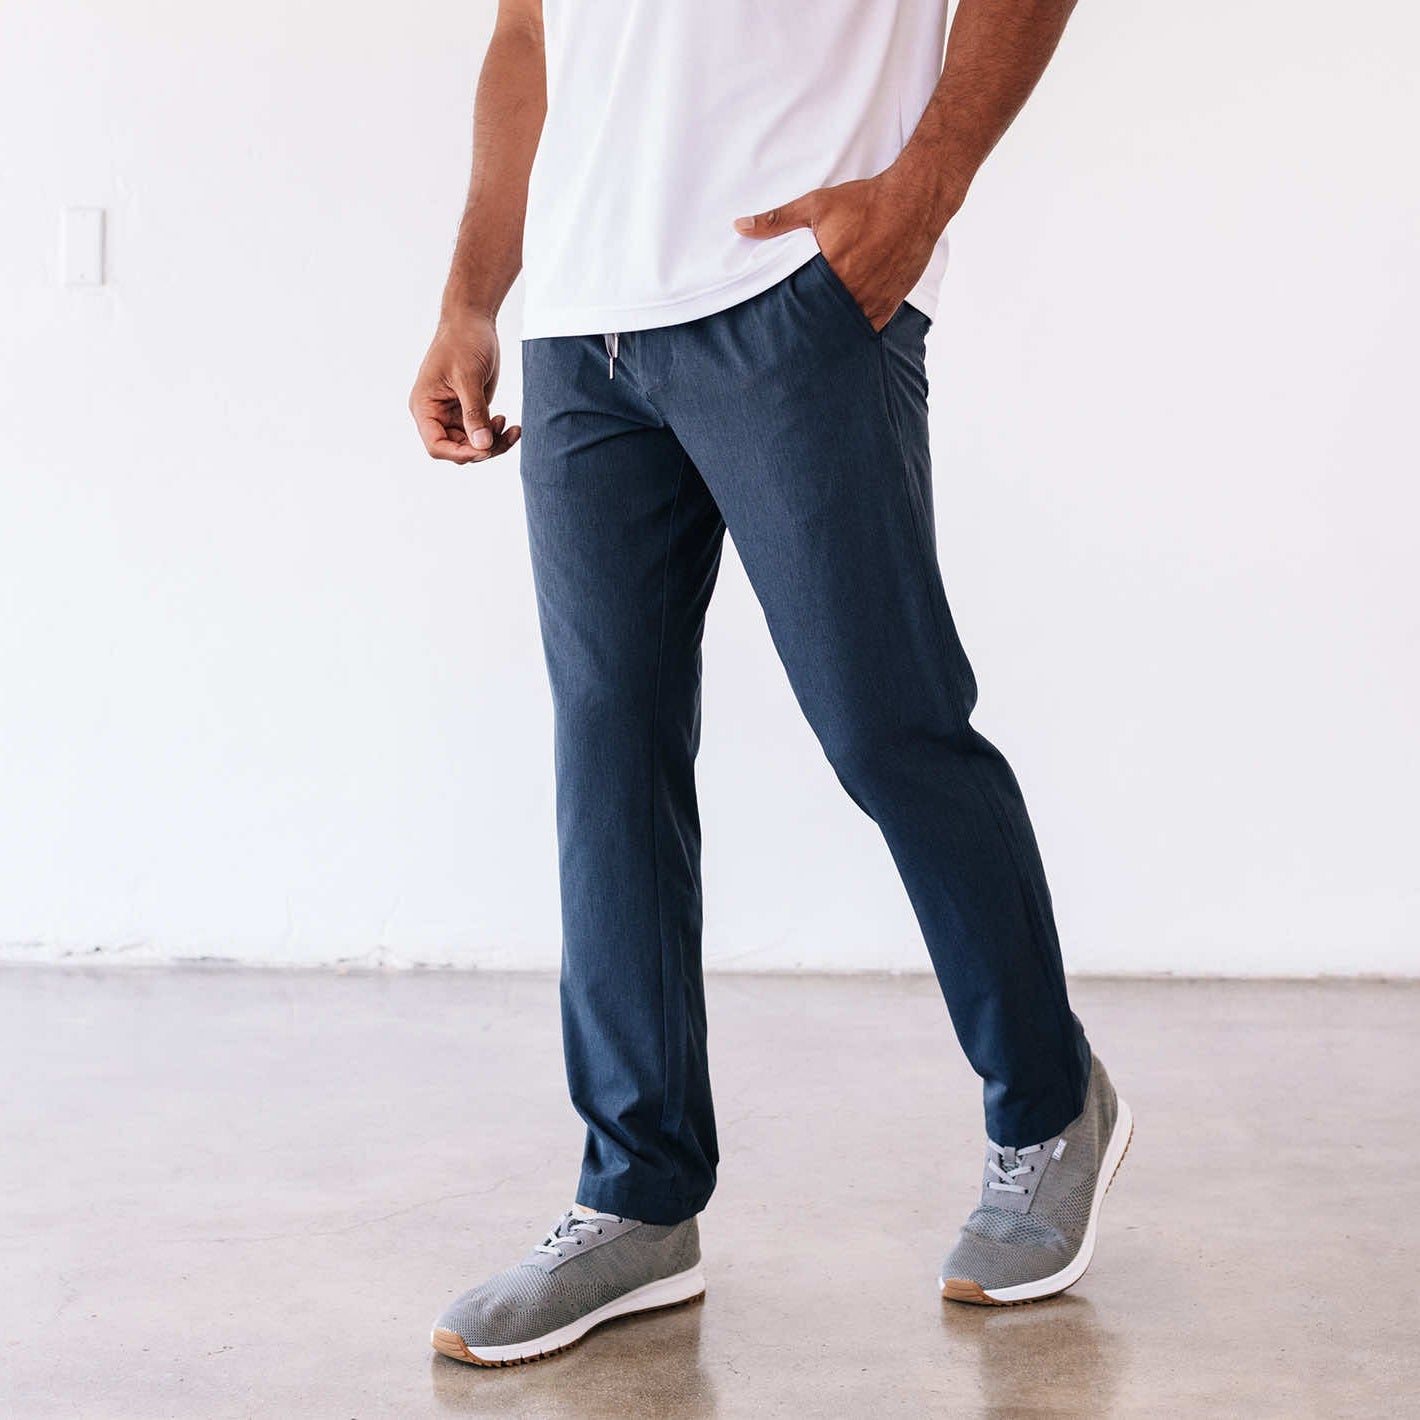 Linksoul Saturday AC Pant in Navy